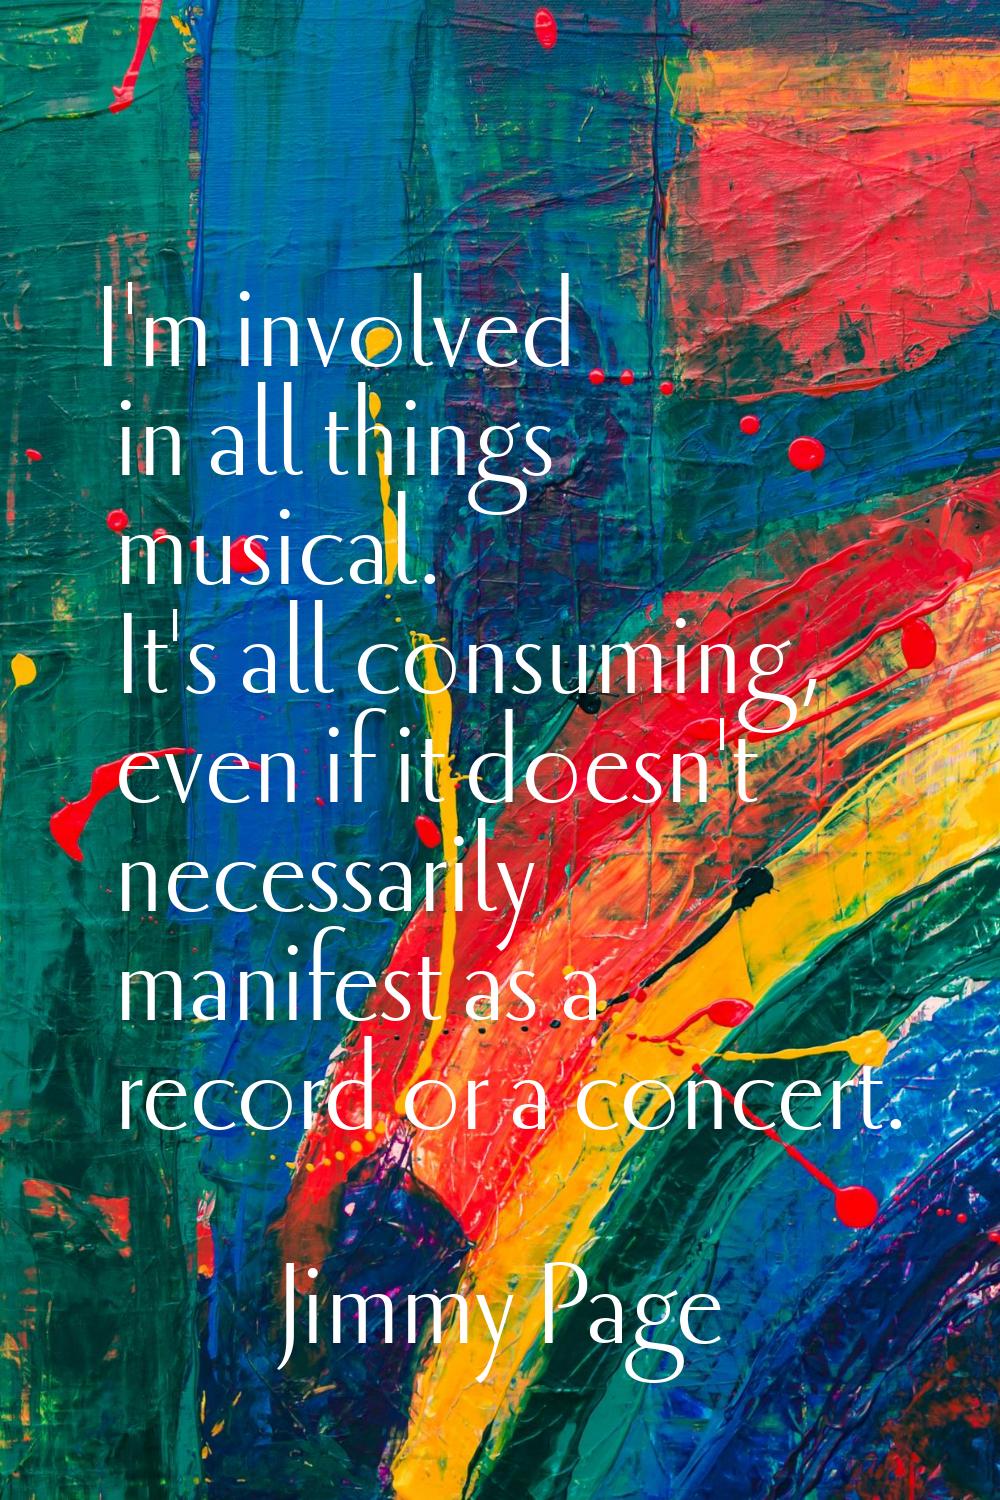 I'm involved in all things musical. It's all consuming, even if it doesn't necessarily manifest as 